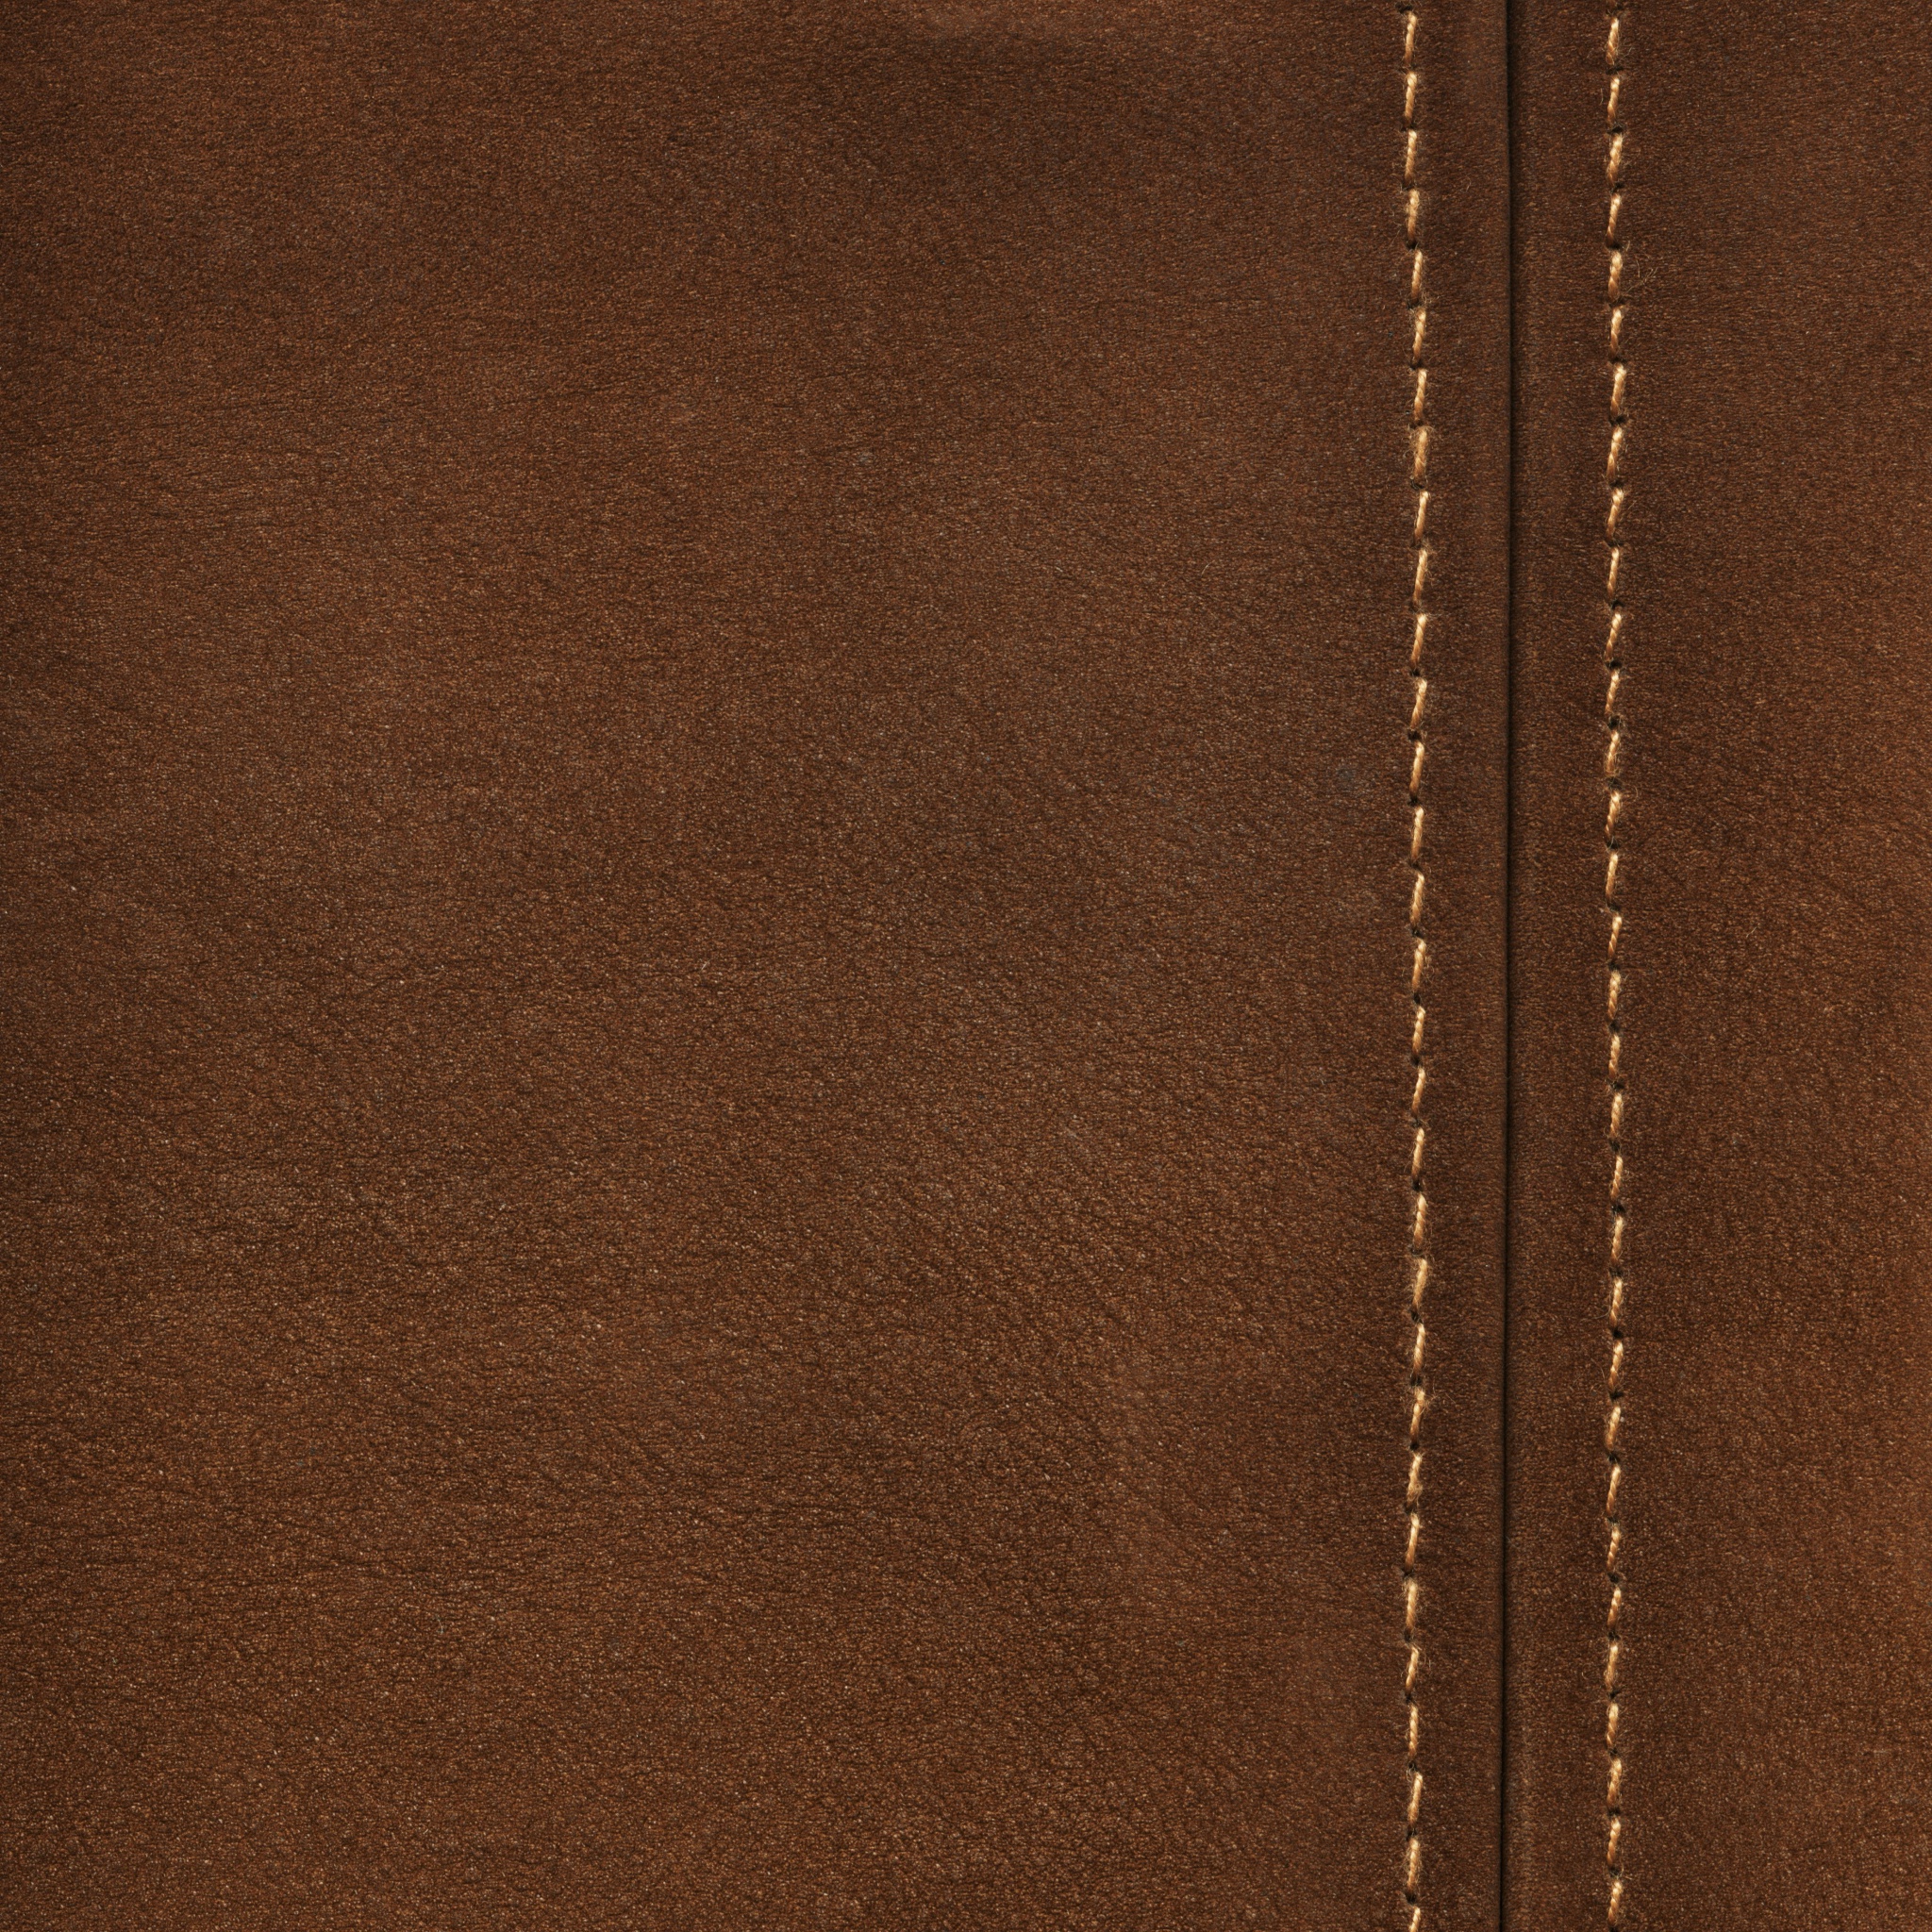 Das Brown Leather with Seam Wallpaper 2048x2048